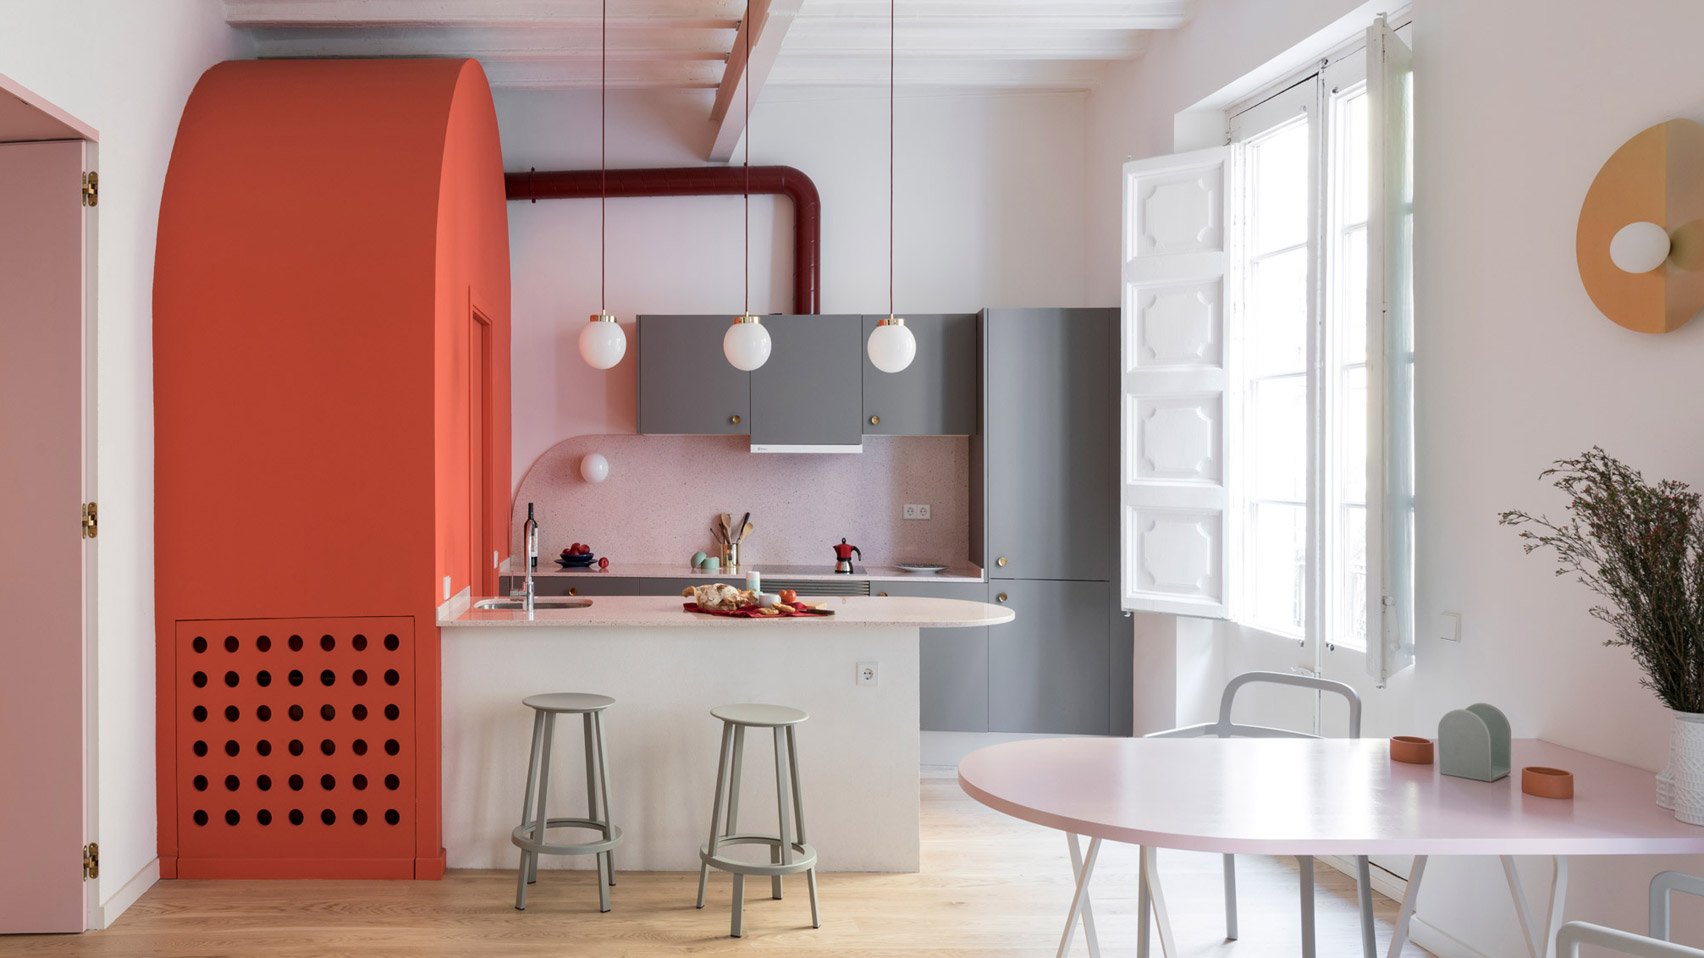 The Dezeen guide to kitchen layouts - Win2All